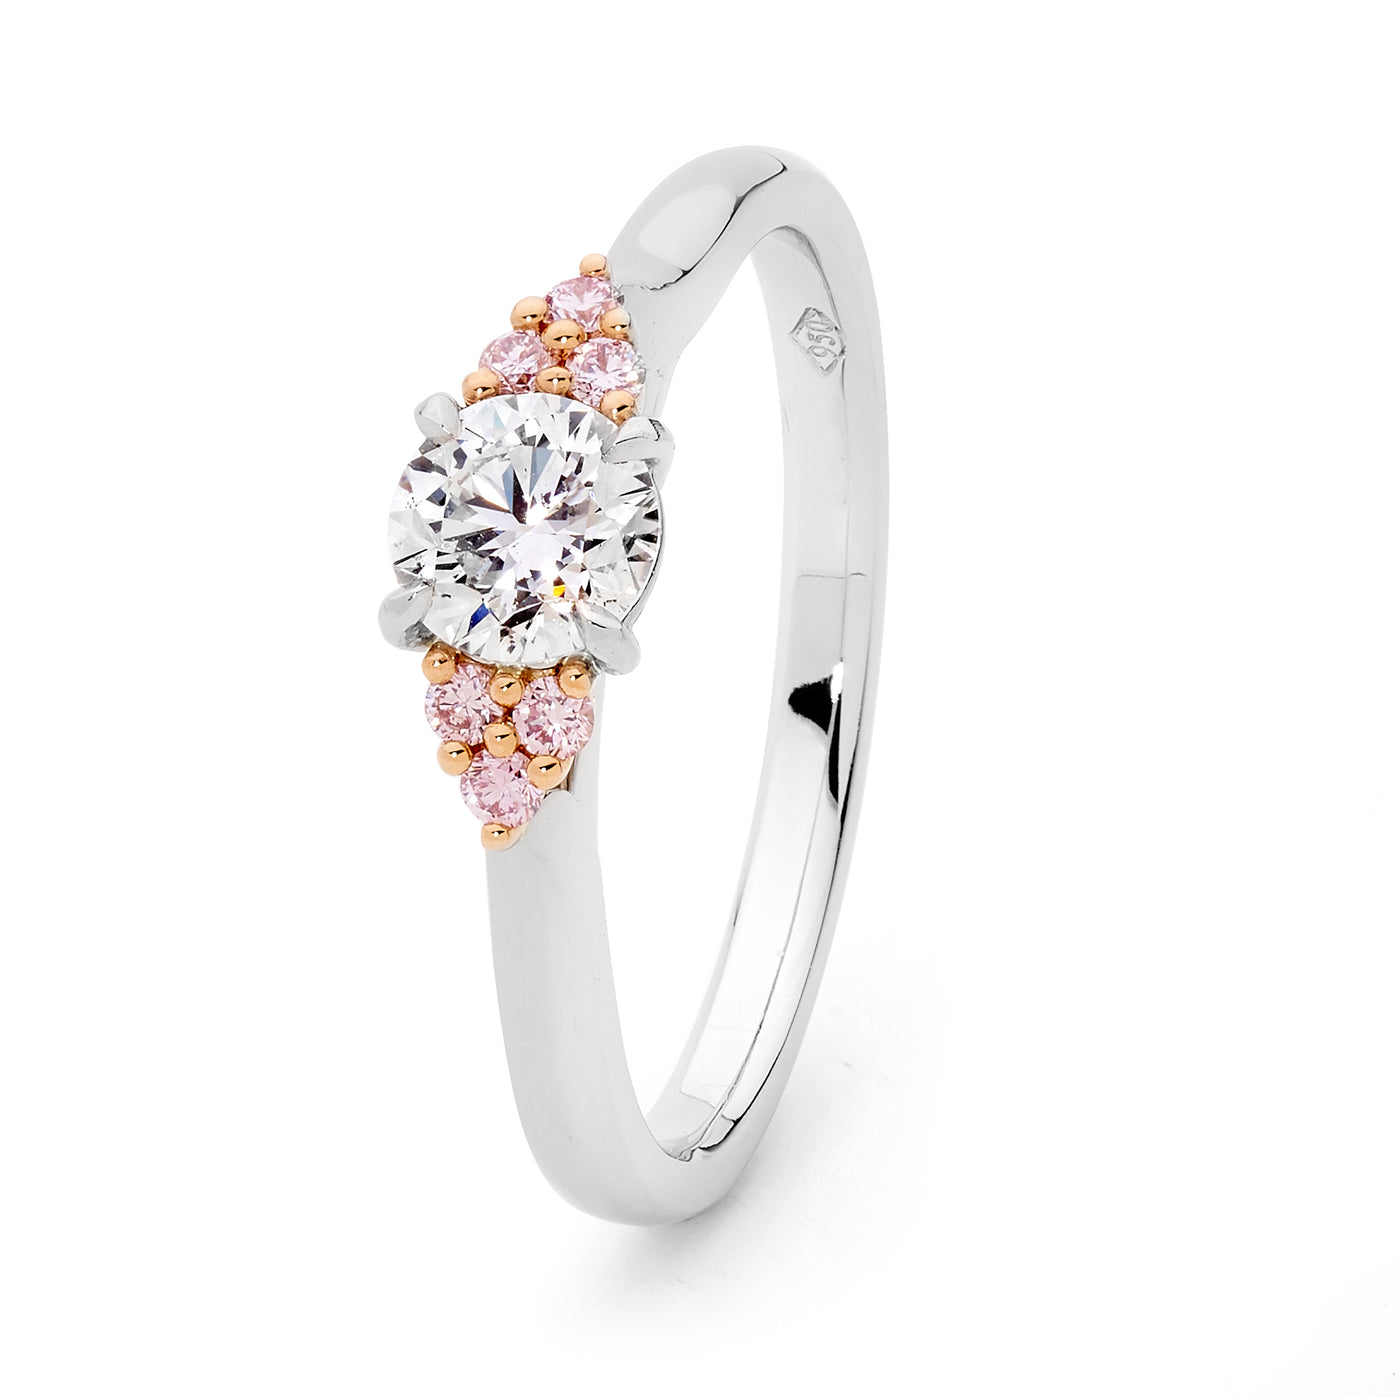 Ellendale 18Ct White And Rose Gold Argyle White And Pink Diamond Ring.